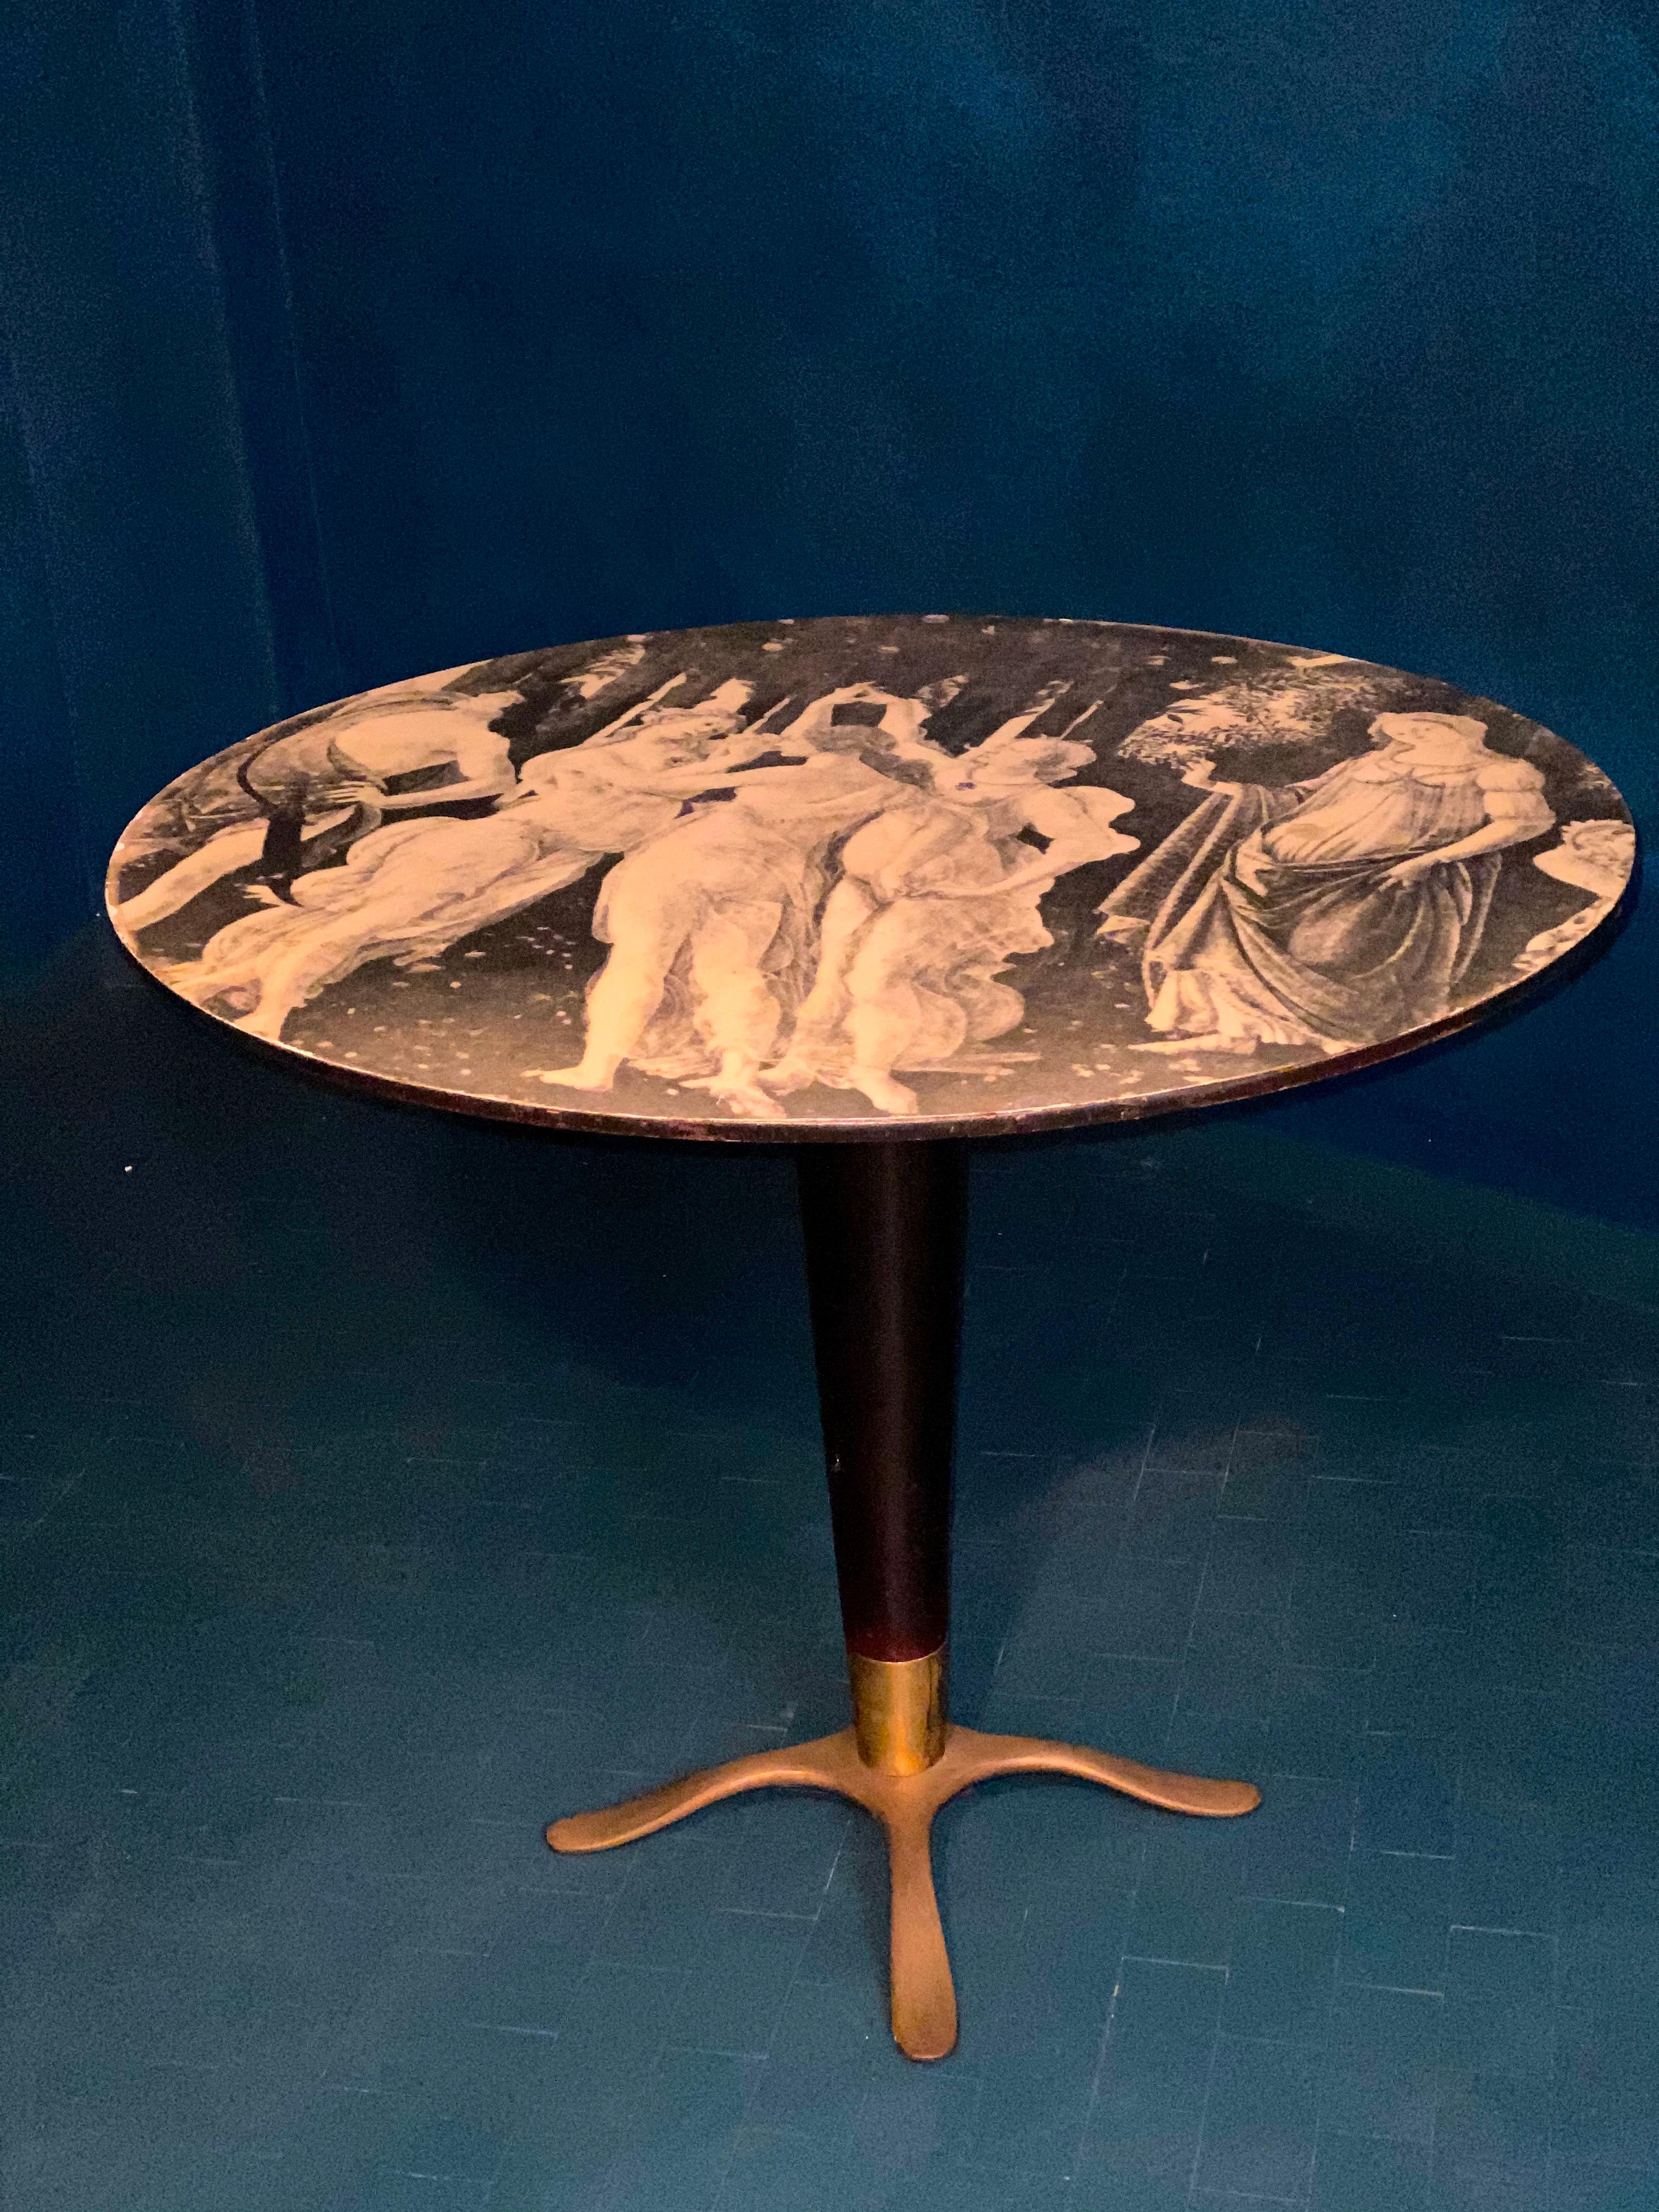 Elegant Italian center table or occasional table with brass tripod base.
The tabletop decoration with Boticelli lithographic print on lacquered wood base and glass top.